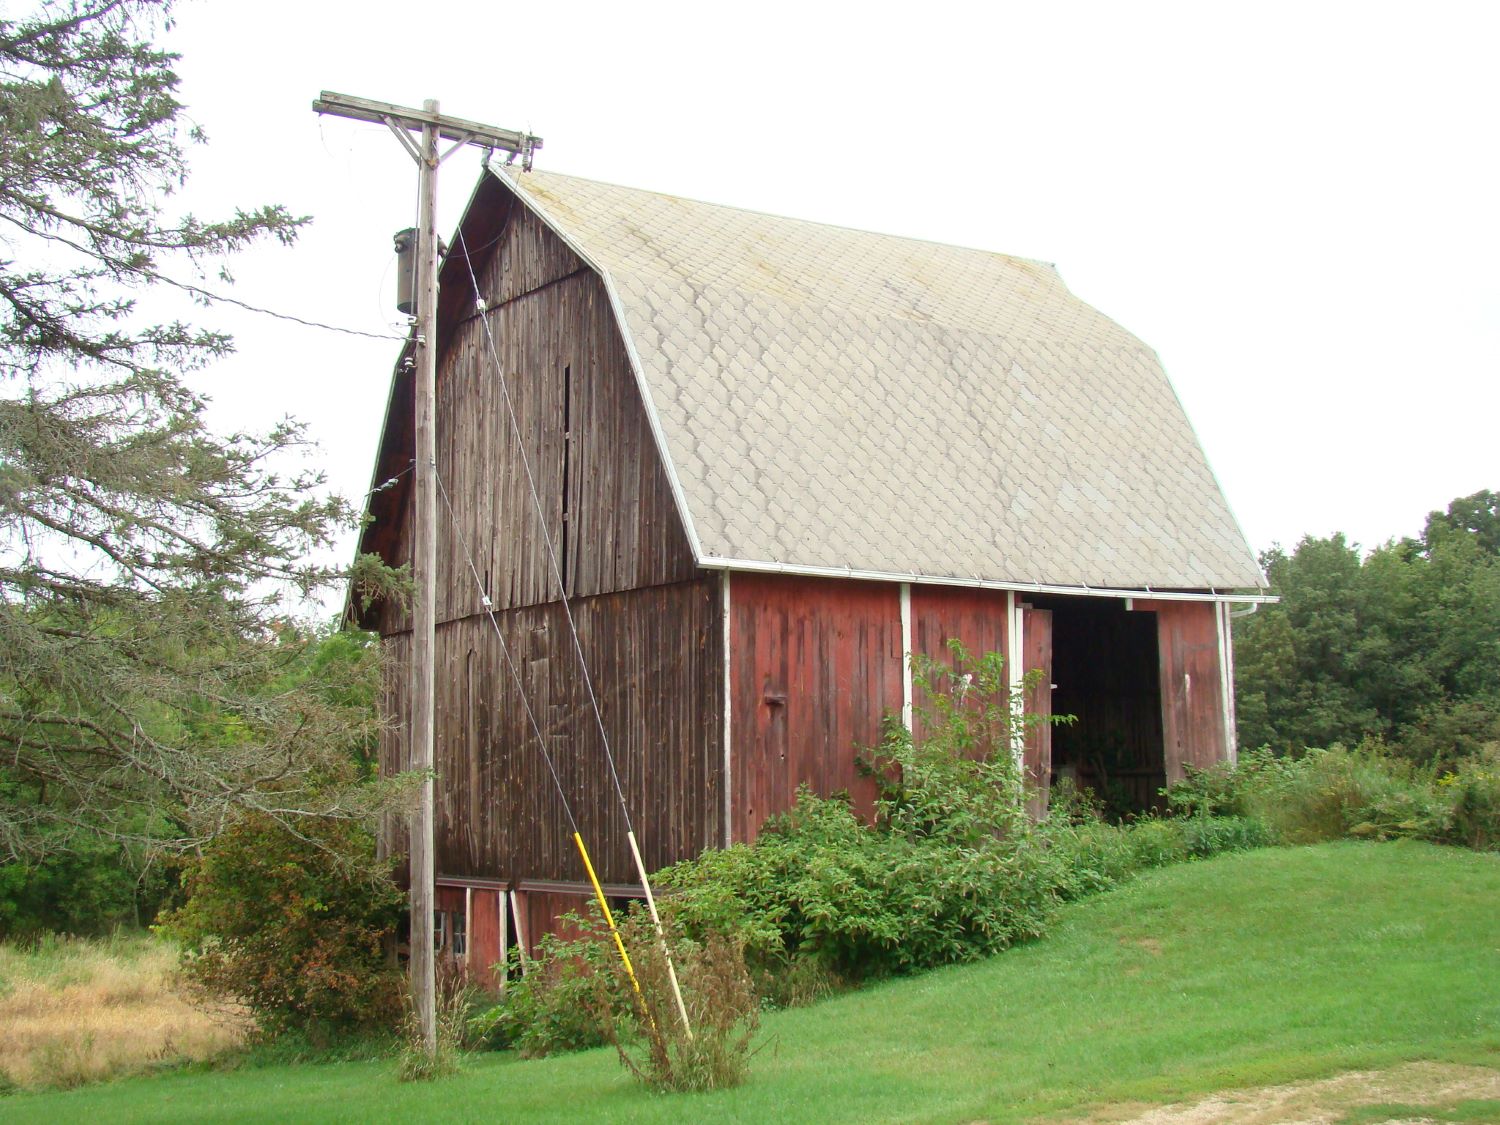 A red barn with white shingles from Perry, MI